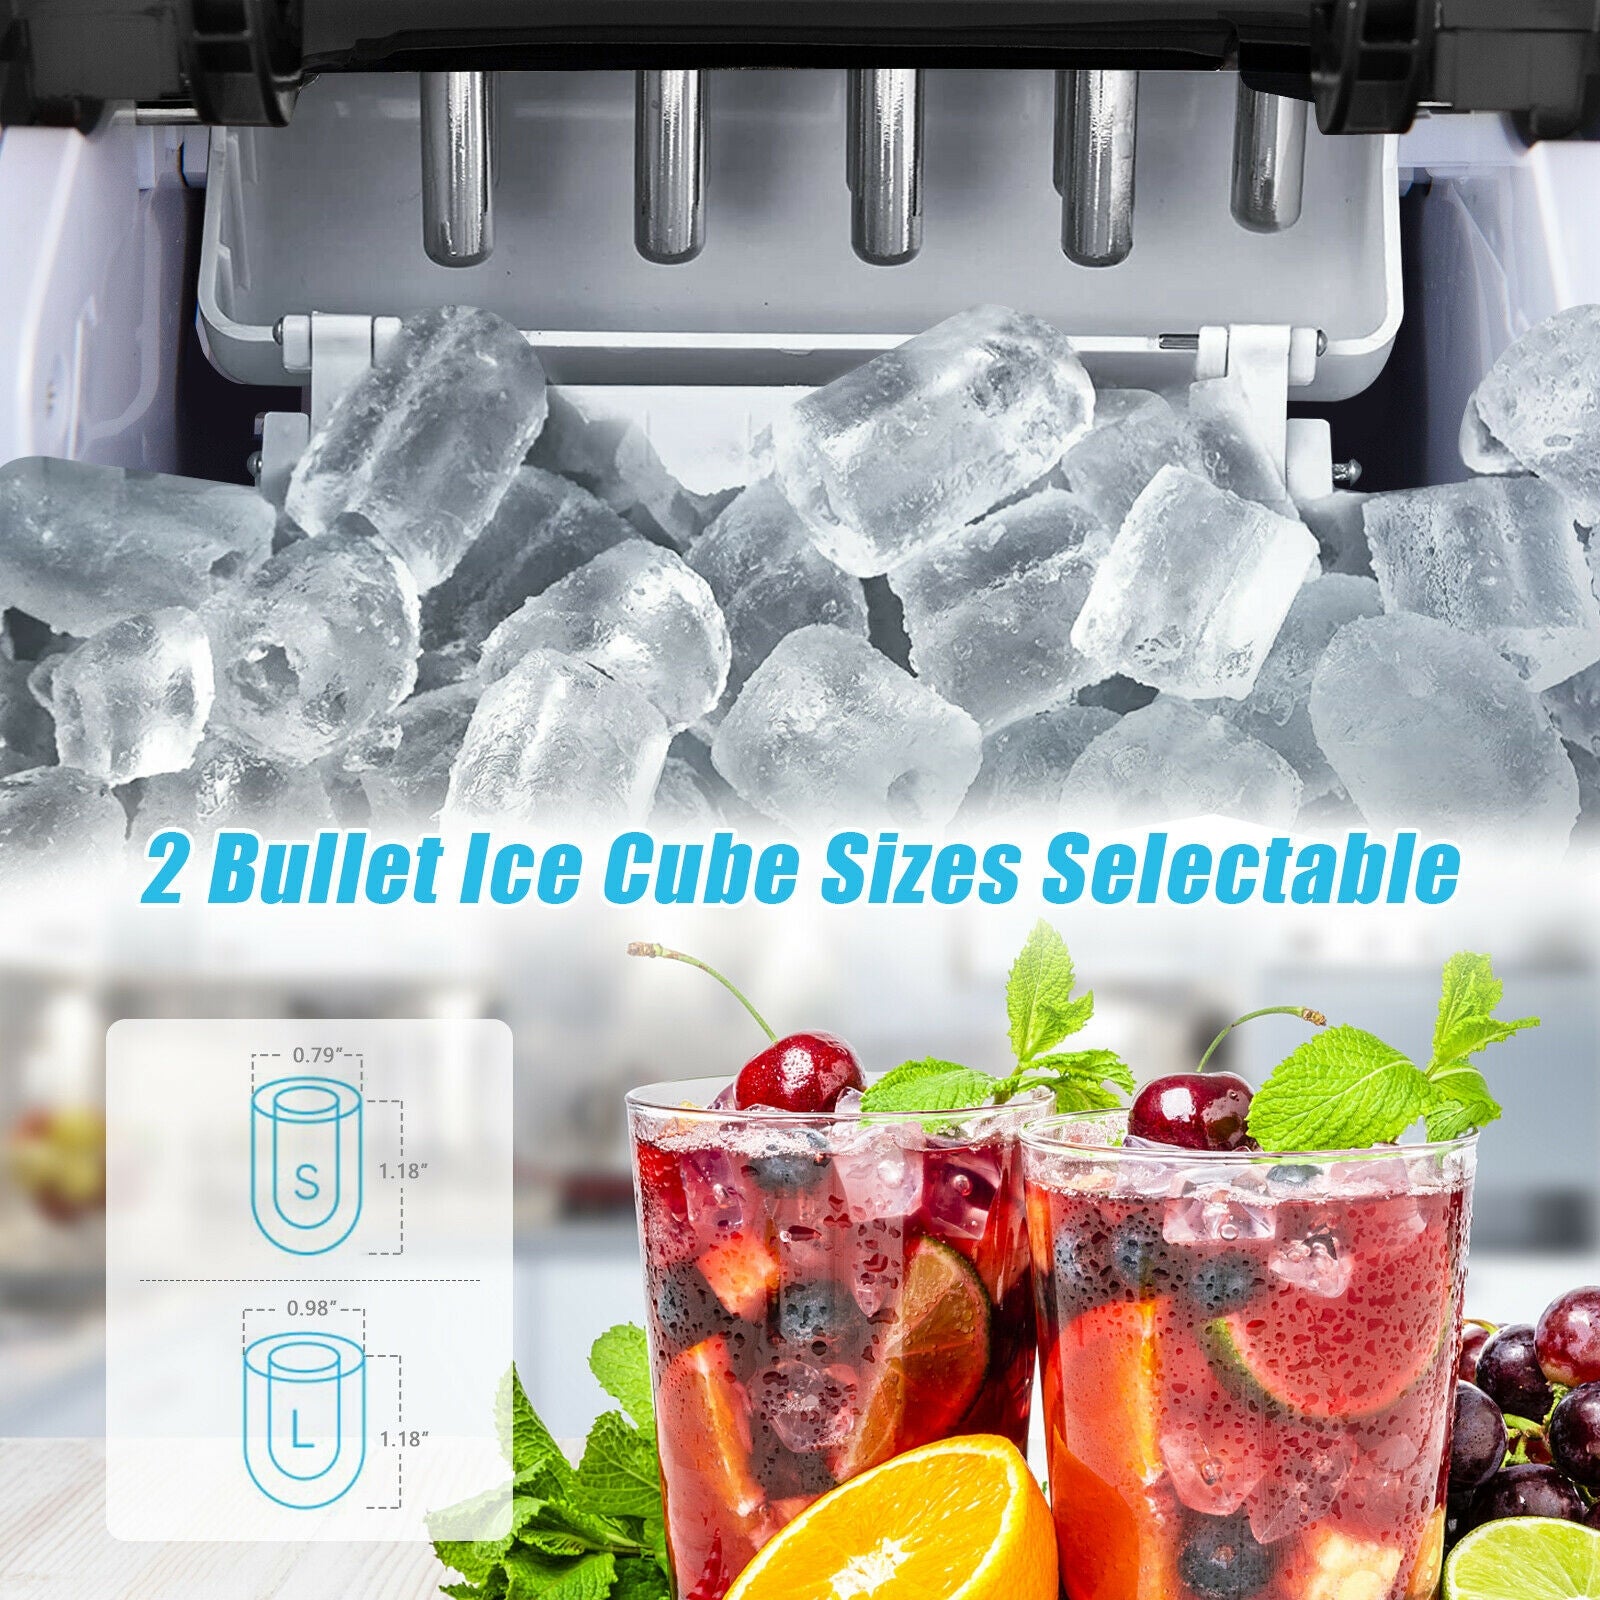 Choice of Ice Sizes: Tailor your drinks with either small or large-sized ice cubes. These round bullet-shaped ice cubes won't harm your mouth. The advanced condenser ensures crystal-clear ice cubes, perfect for chilling beverages, making cocktails, or preserving seafood. The ice maker comes with a removable ice basket and a convenient ice shovel for serving.